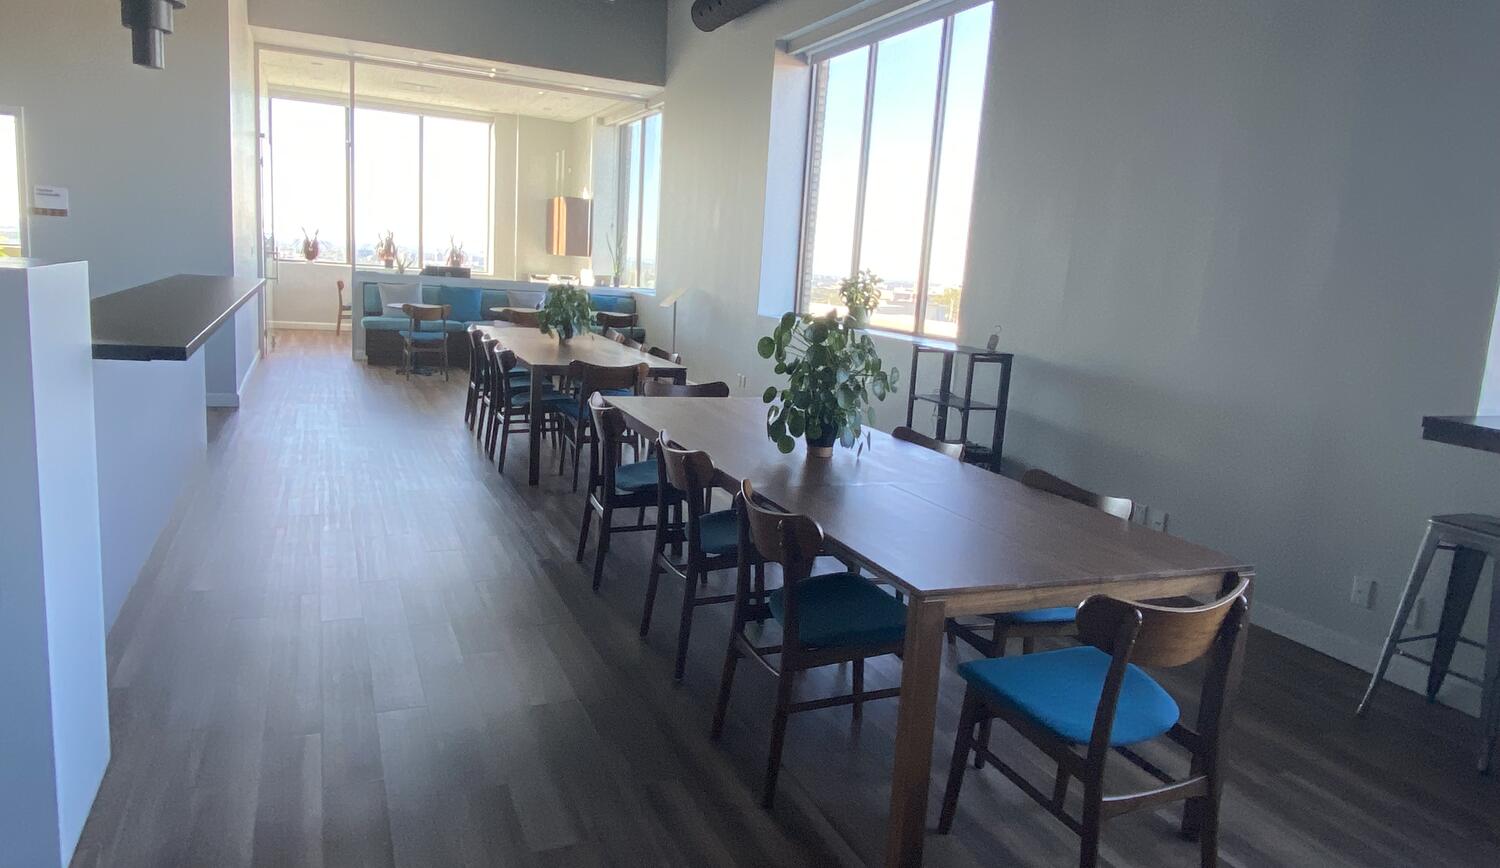 Café Connect - a welcoming space